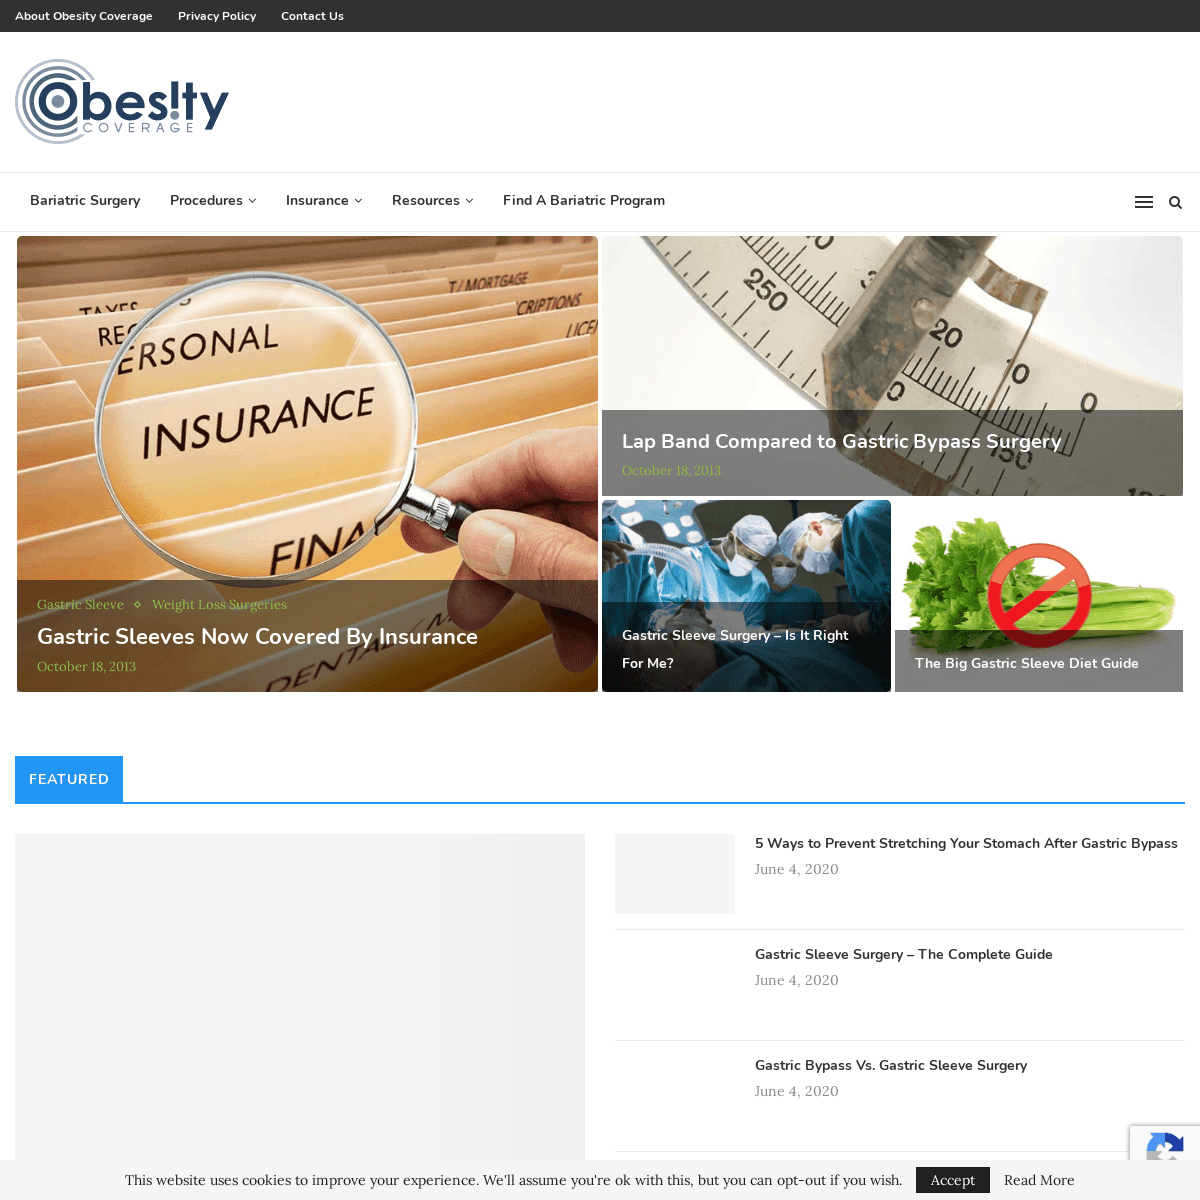 A complete backup of https://obesitycoverage.com